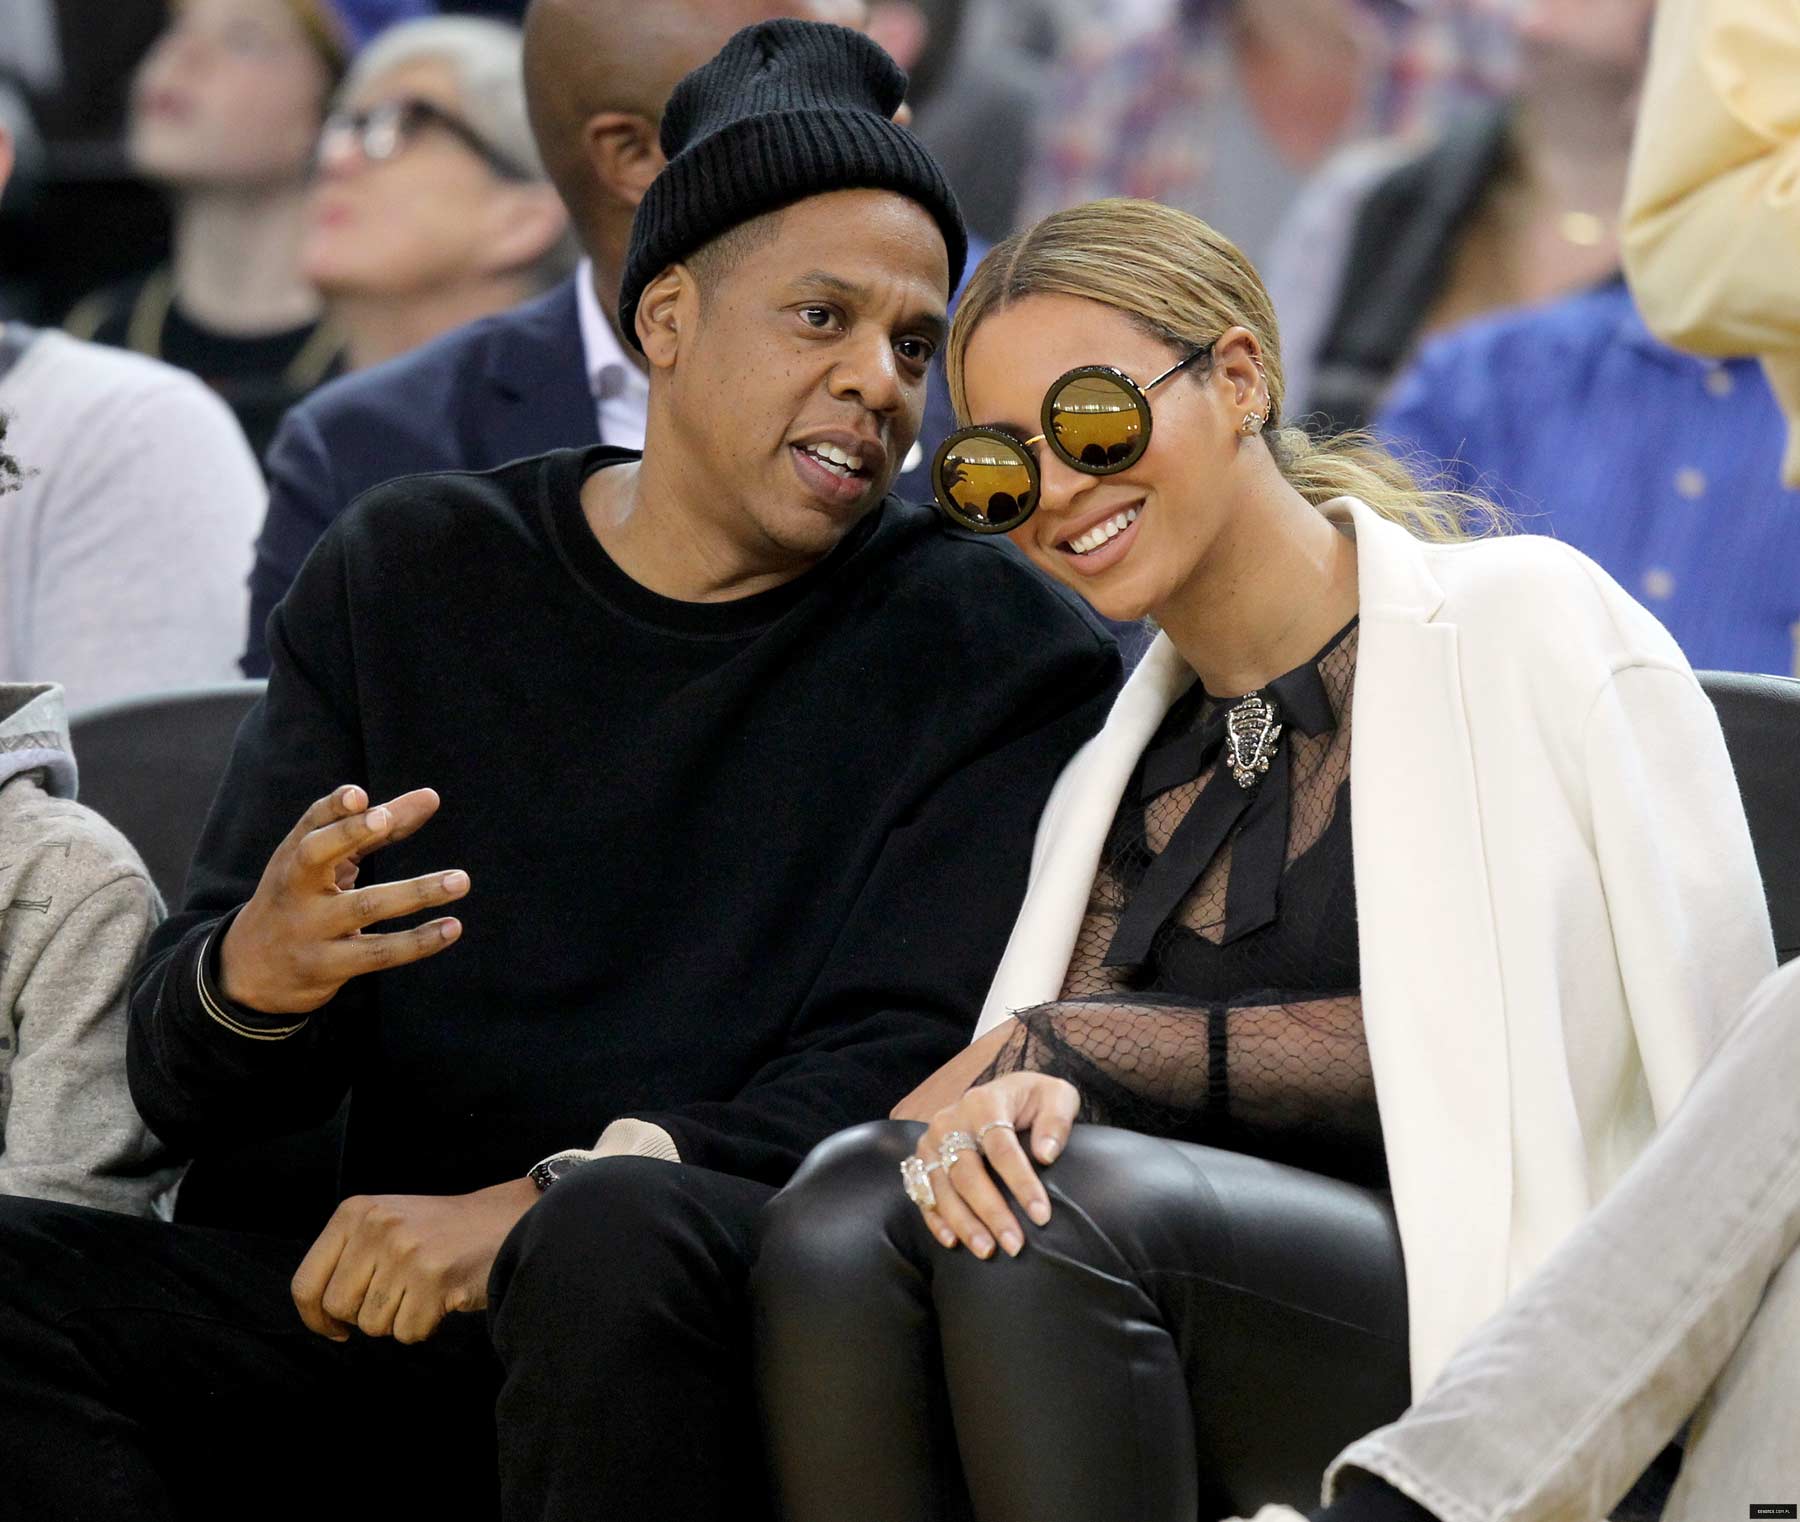 Beyonce at Oklahoma City Thunder vs. Golden State Warriors game